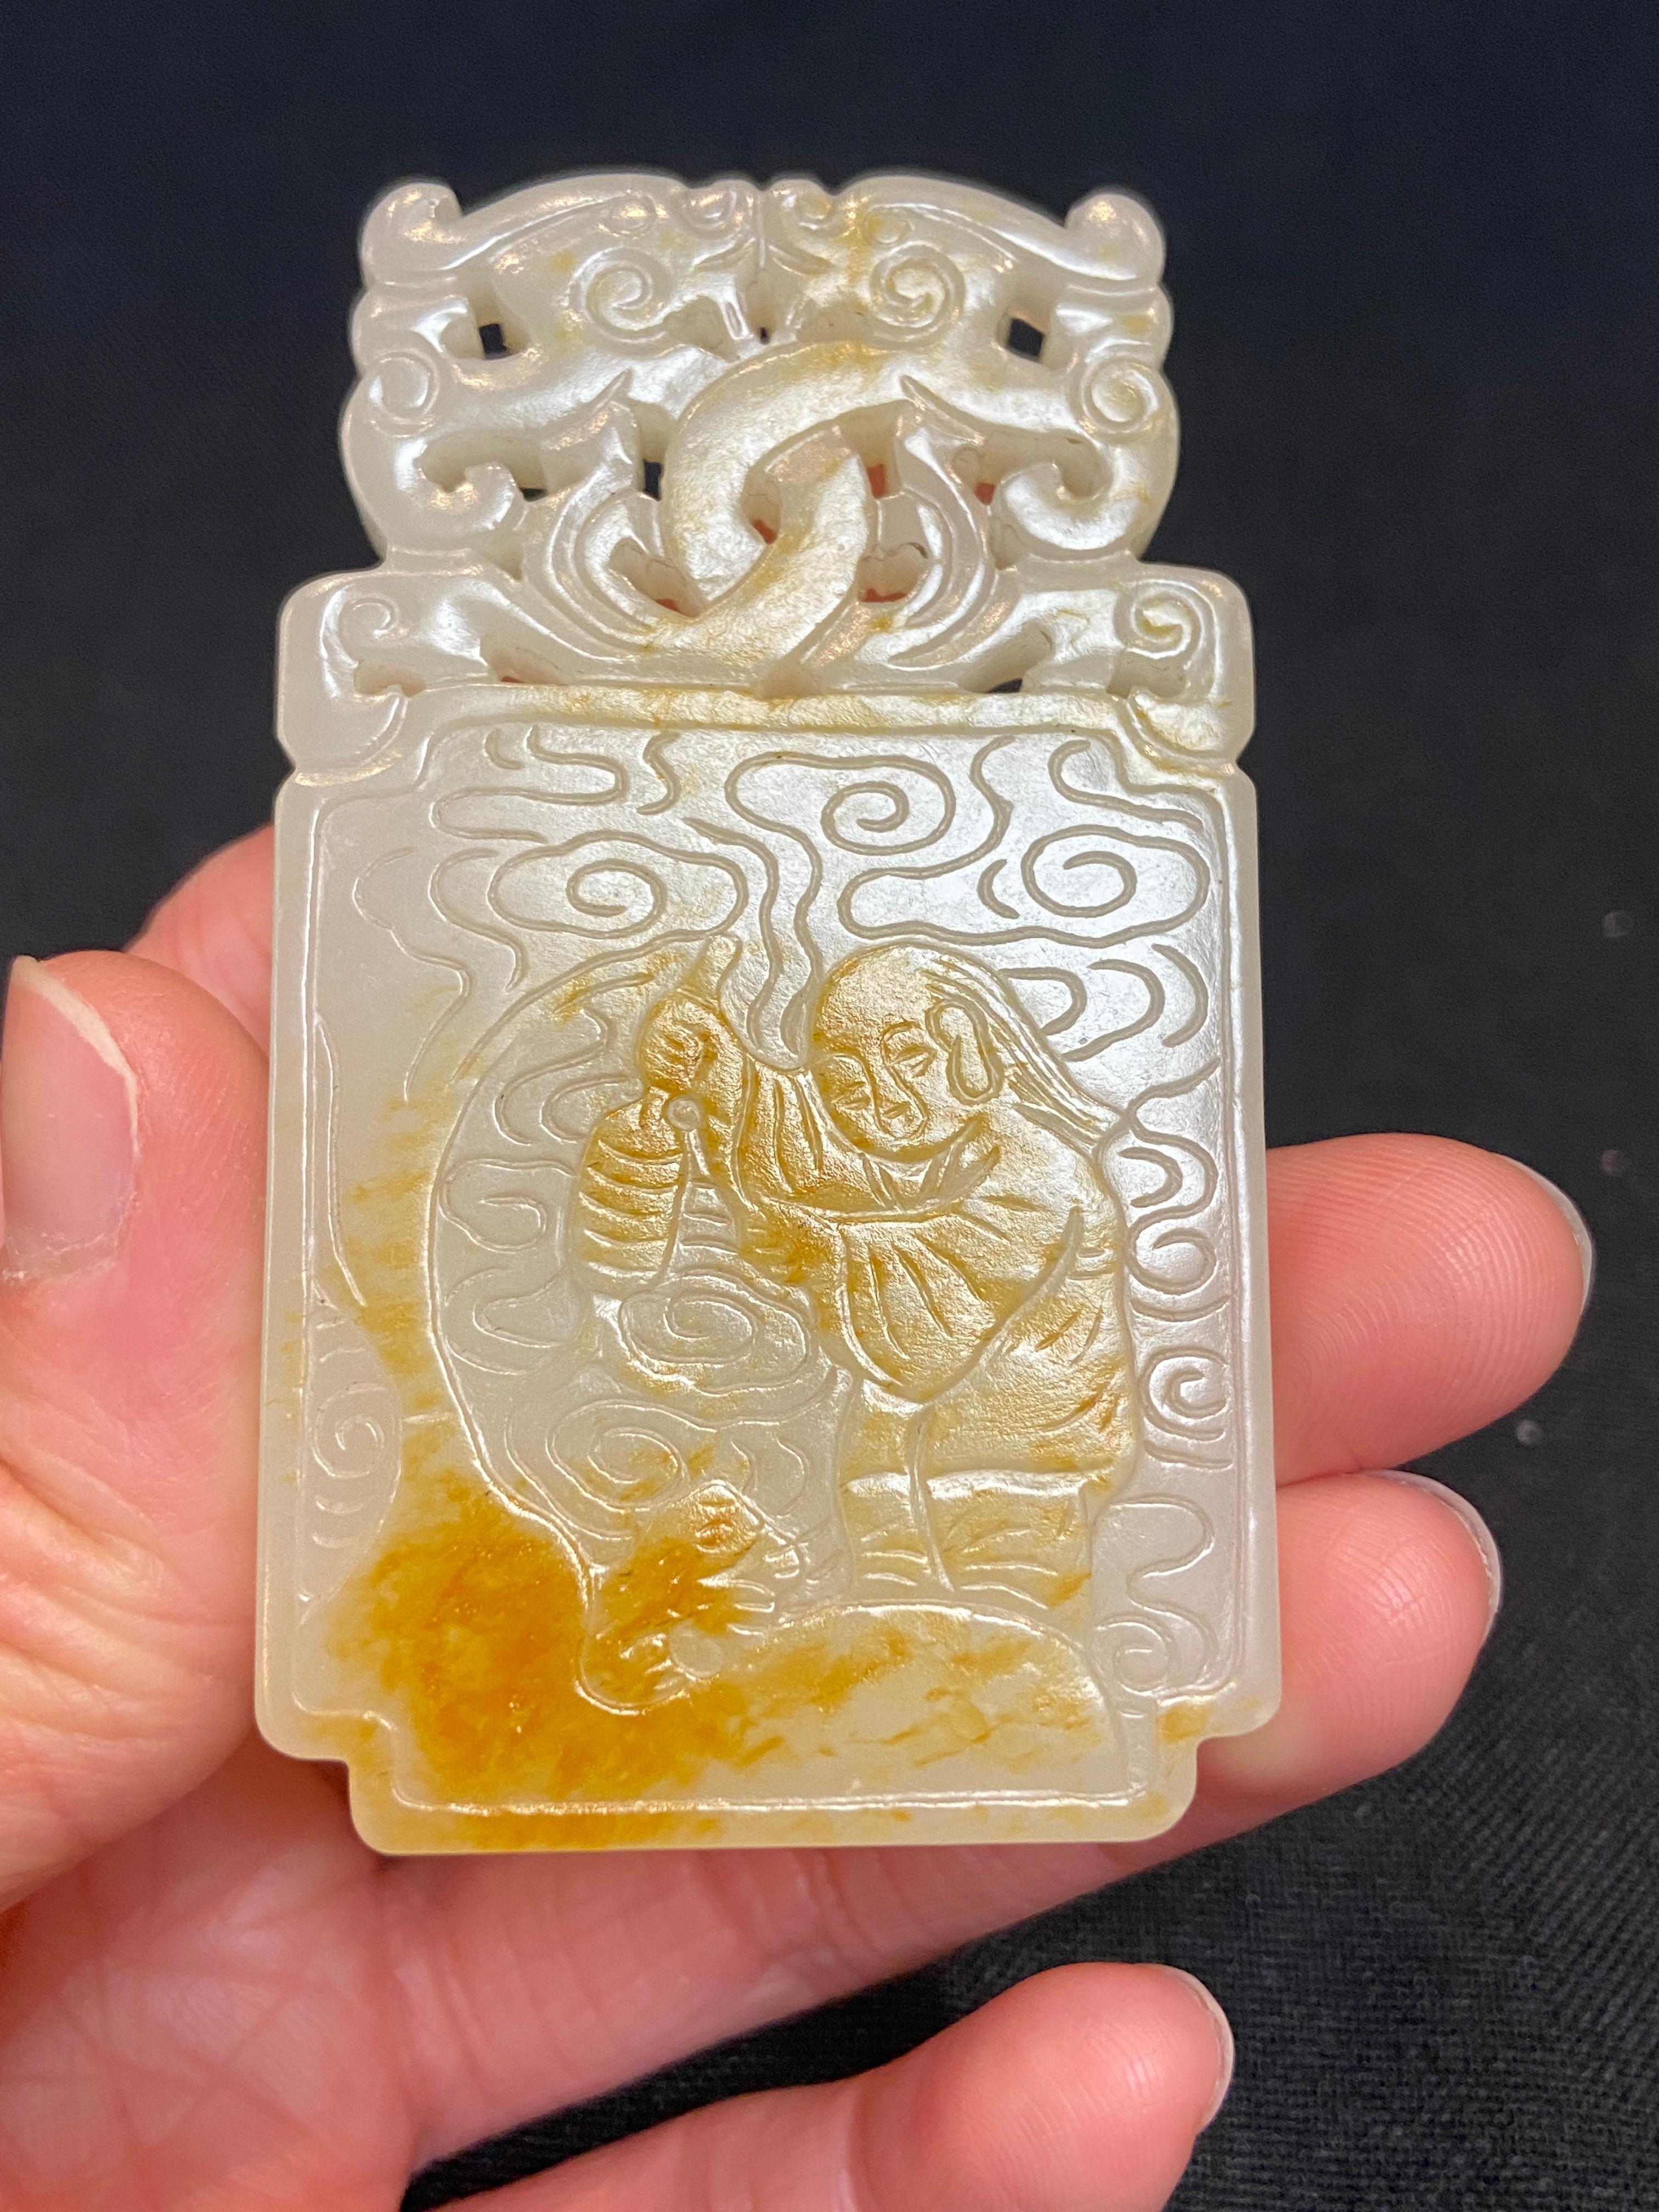 Qing, An antique Chinese Fine carved figural Hetian white jade pendant. ?,?????????
Condition: Shows normal sign of wear and use, No damage or crack. 
Material: Hetian white Jade
Approximate size:L:65.6mm,W:38.6 mm. Thickness: 6mm. Please refer